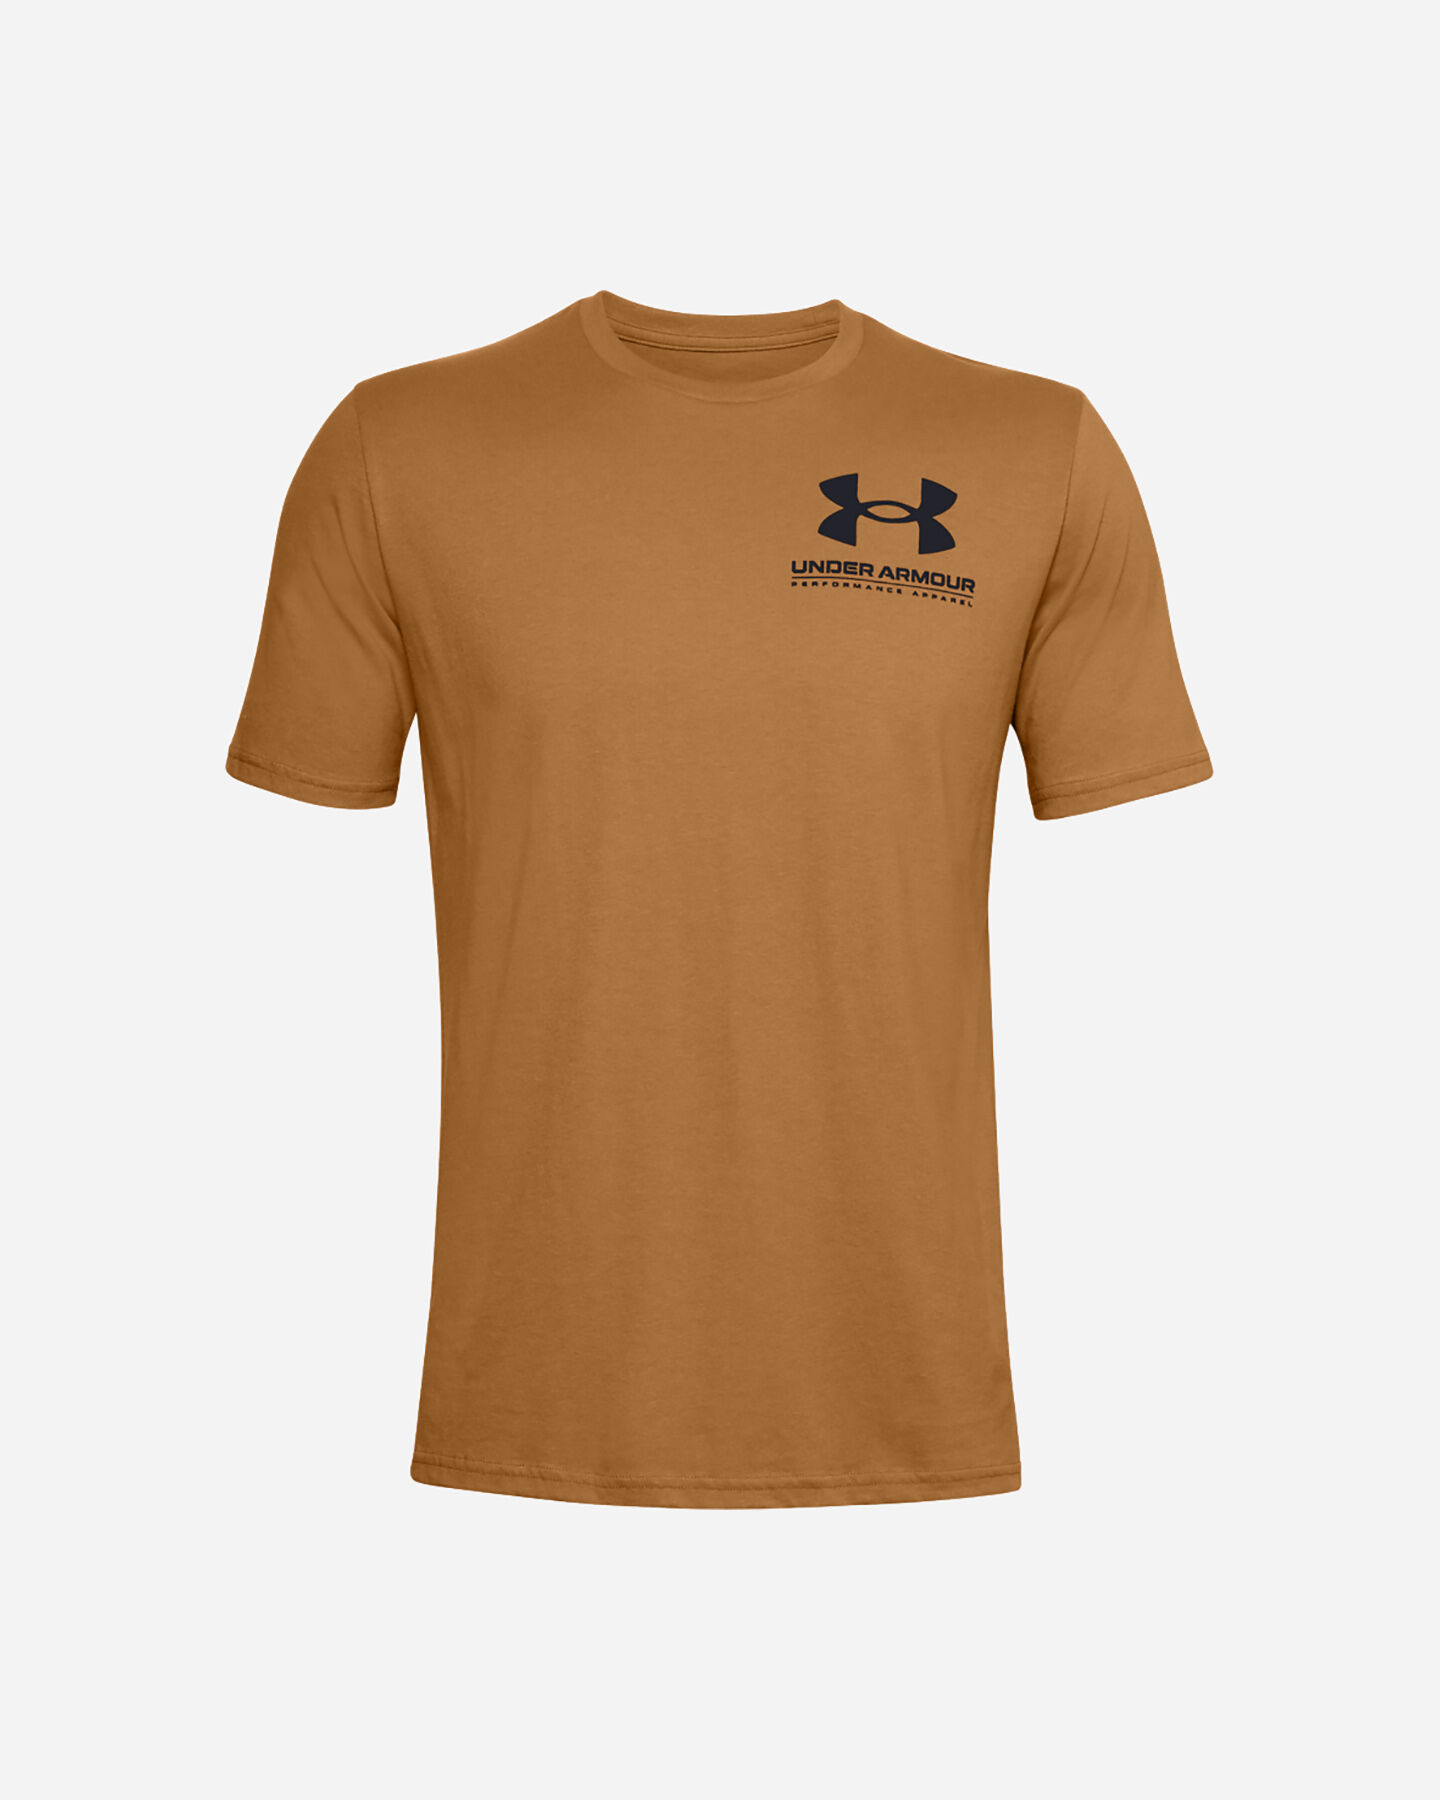  T-Shirt UNDER ARMOUR BIG LOGO M S5229685|0707|XS scatto 0